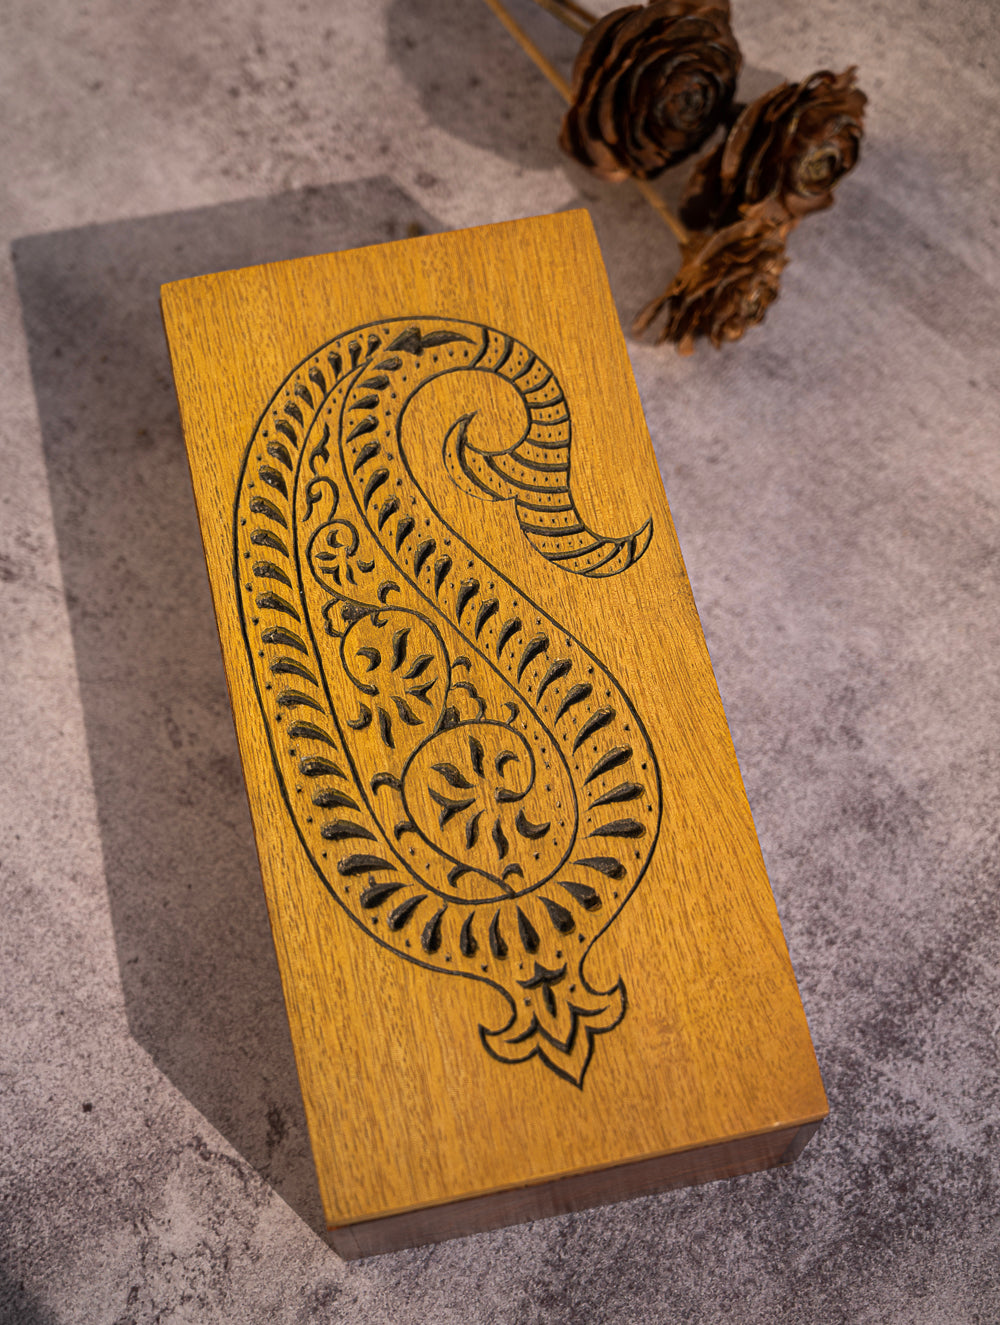 Load image into Gallery viewer, Wood Engraved Paisley Decorative Box